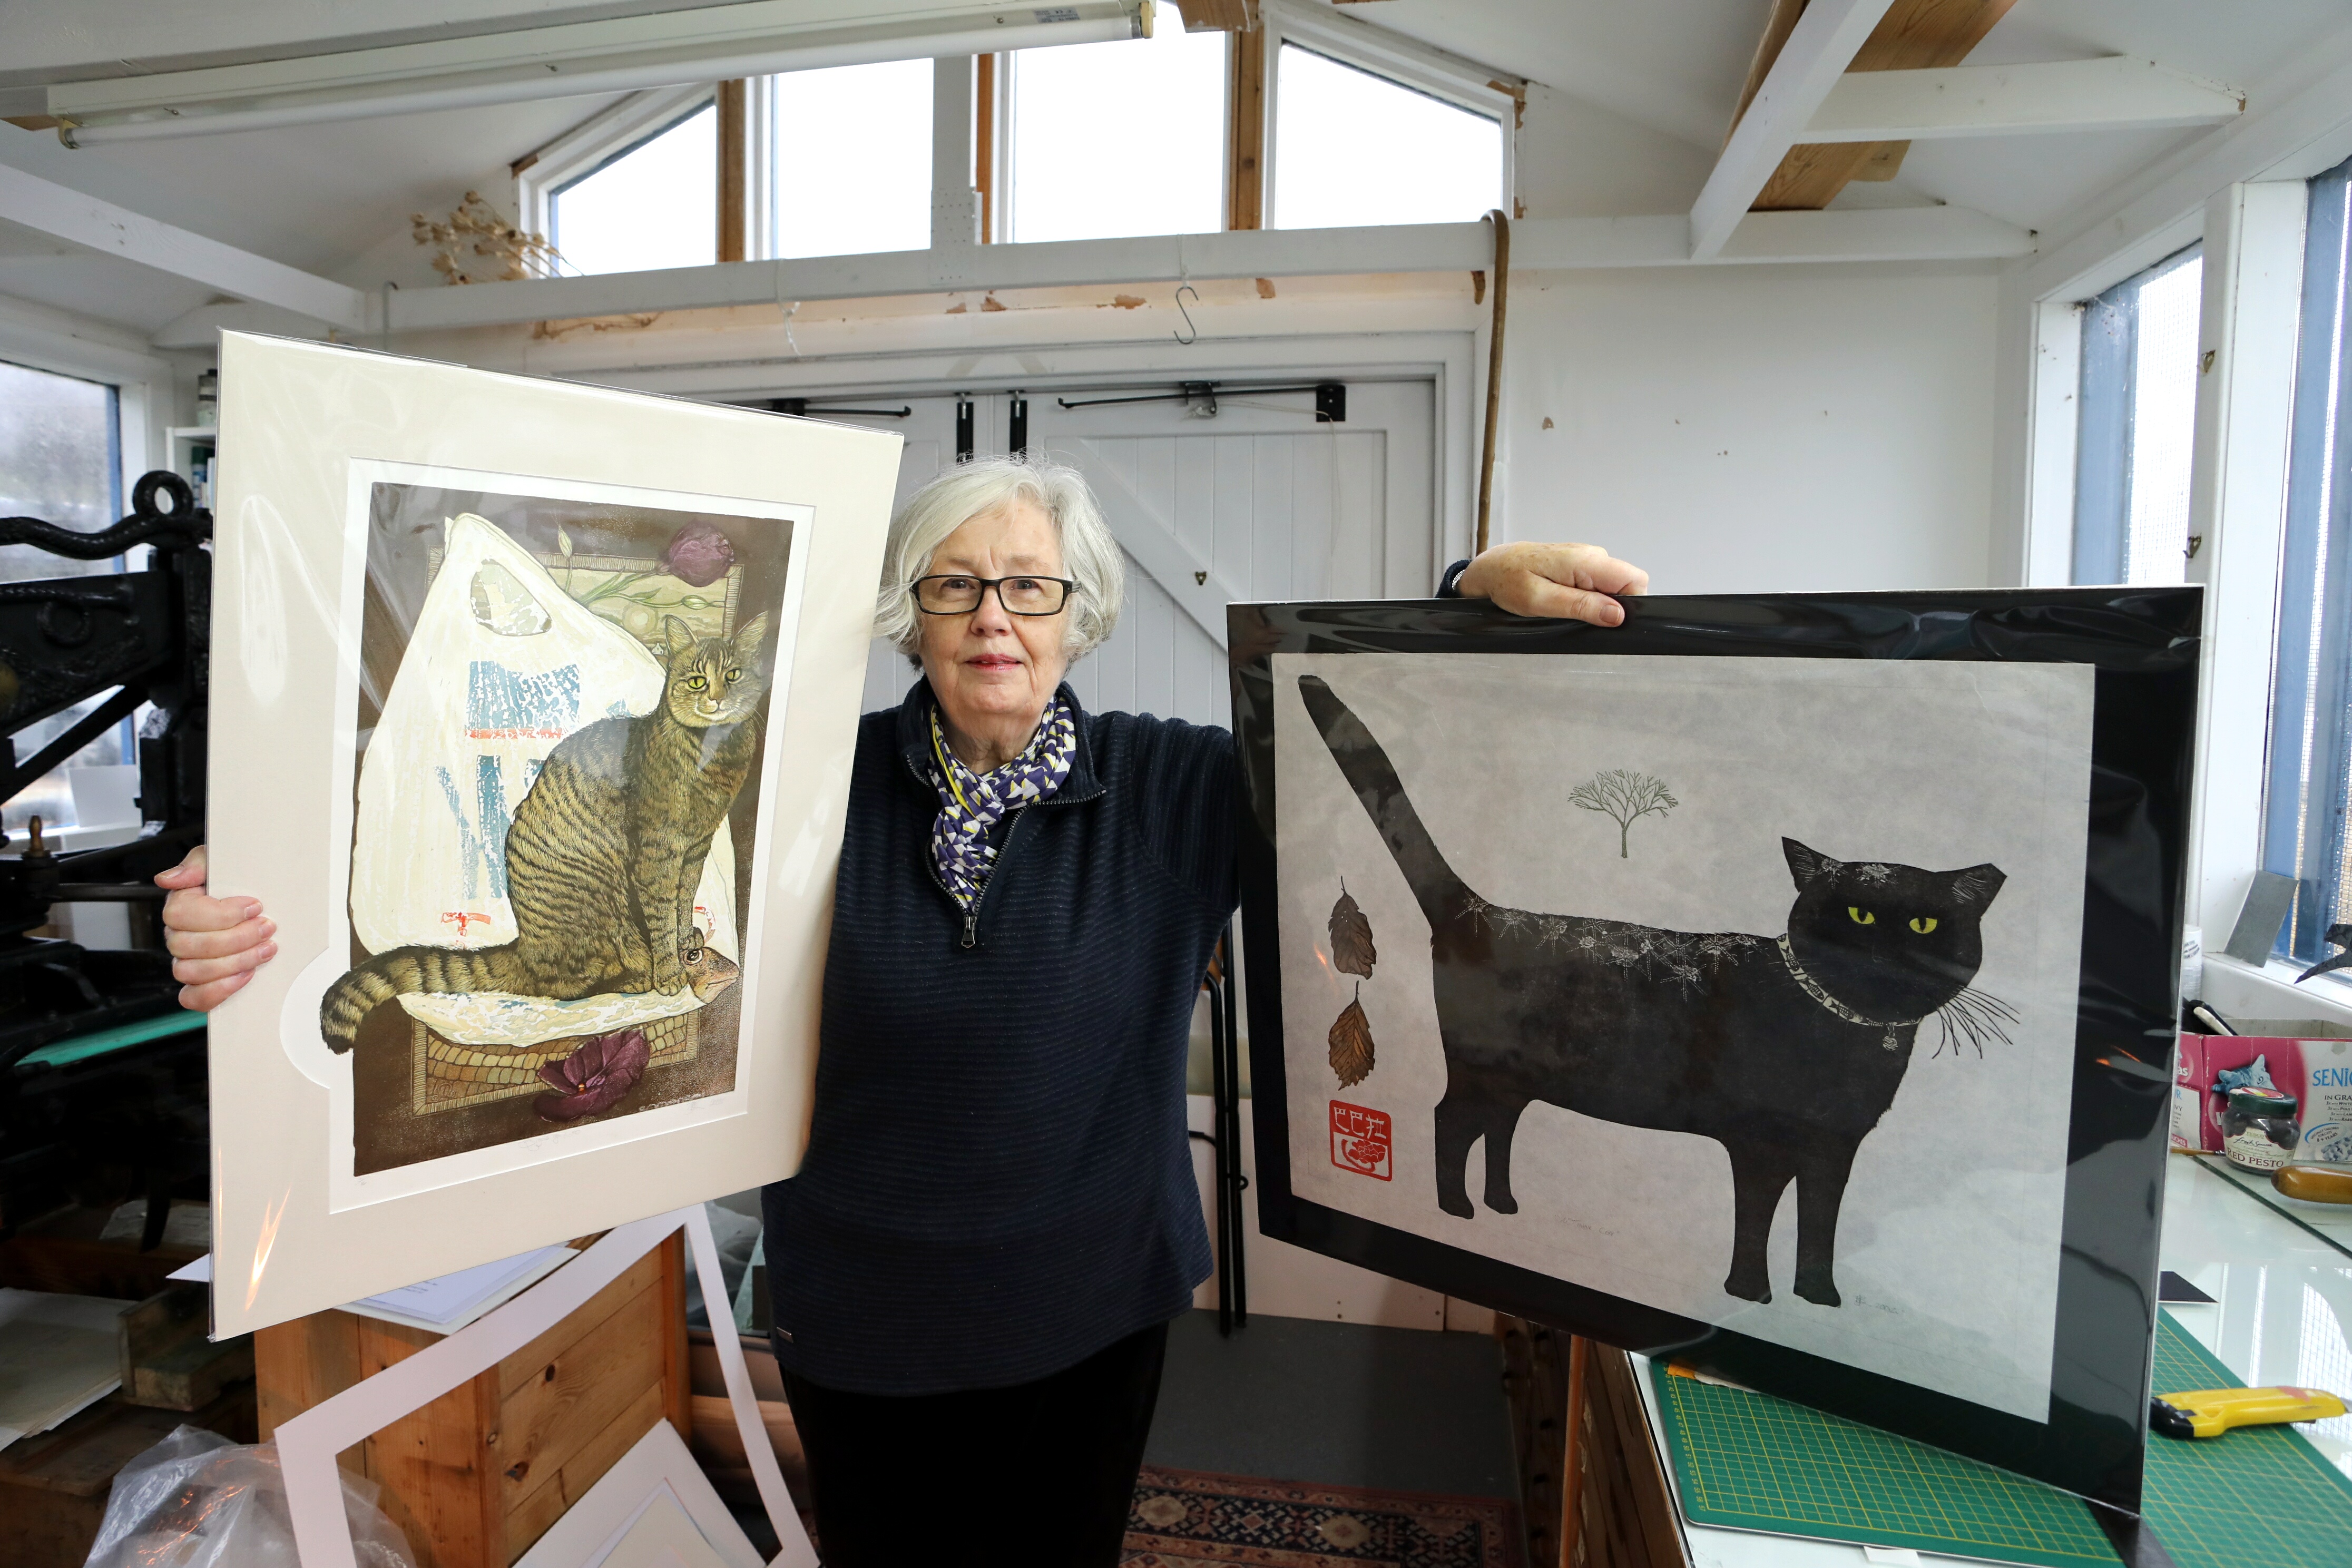 Sheila MacFarlane with two of Barbara Robertson's pieces of artwork entitled "Signs of Leo" and "Winter Cat".